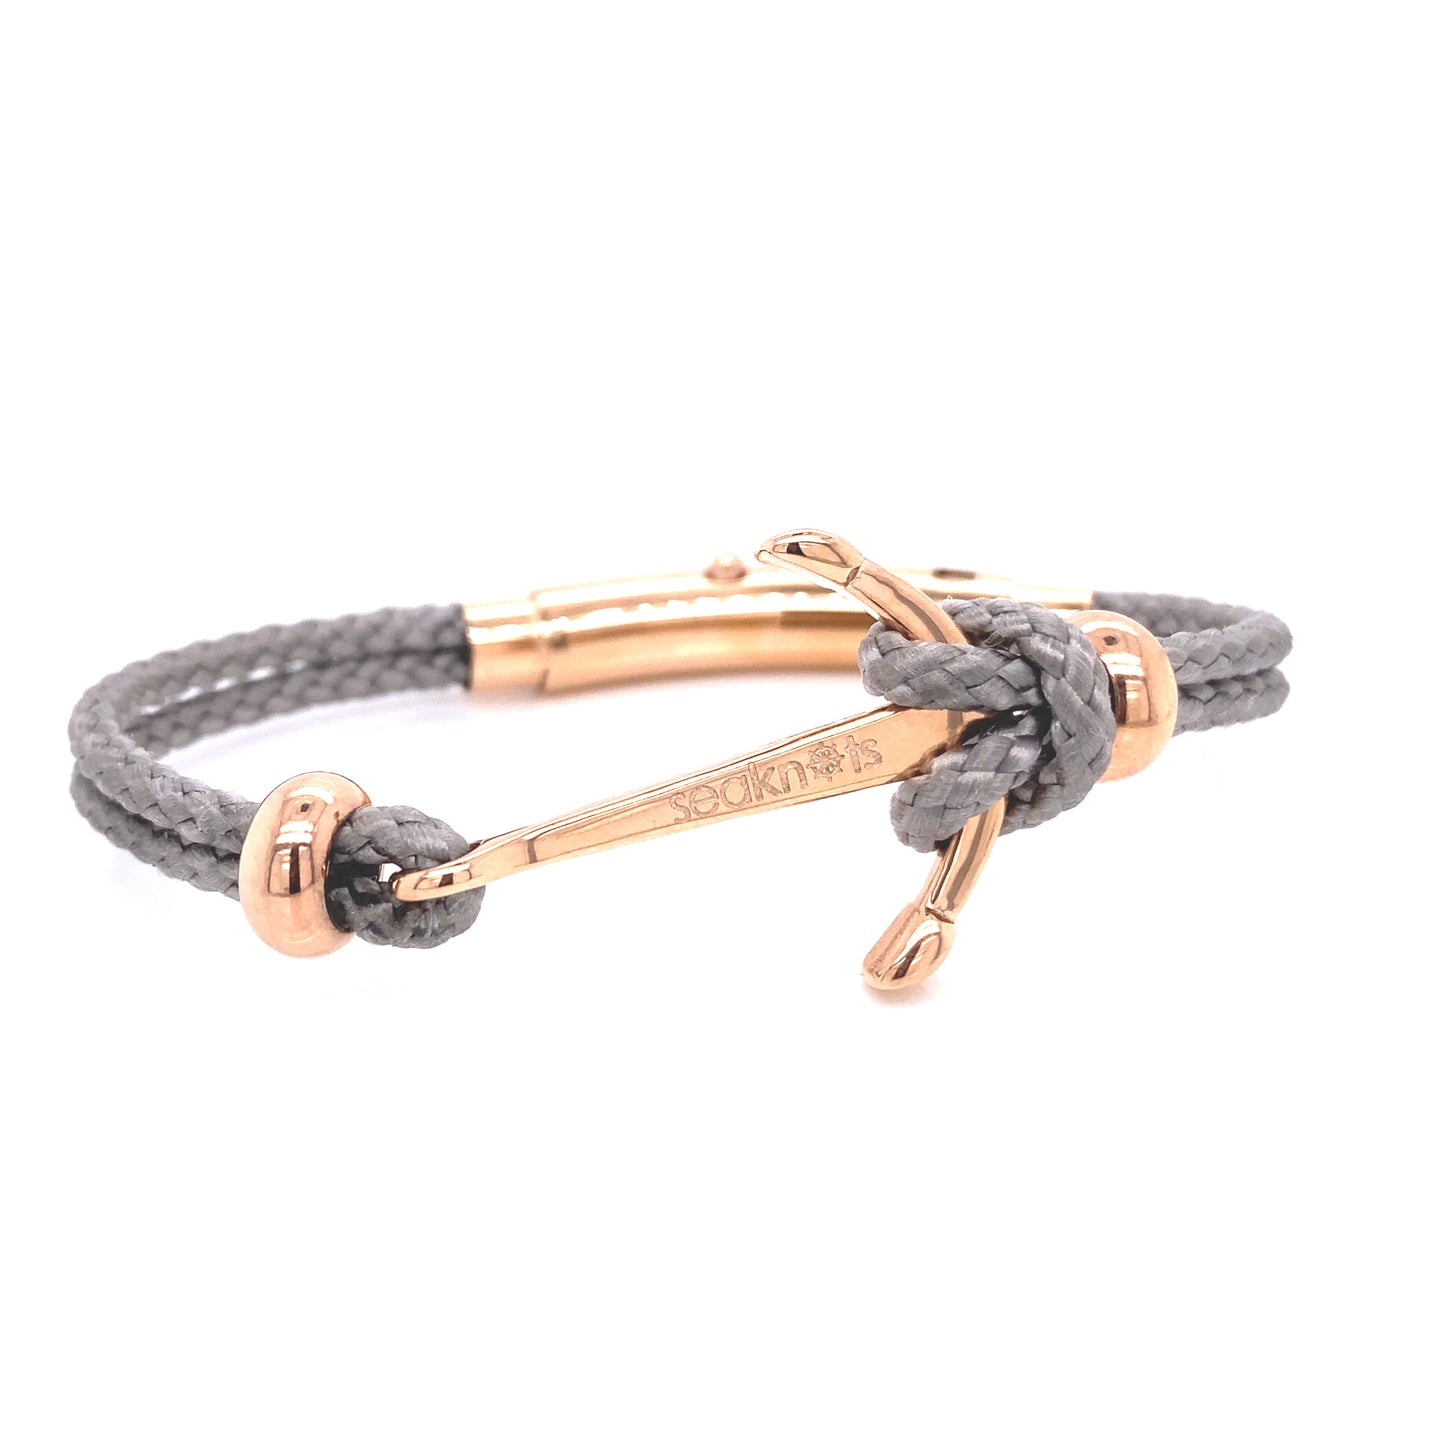 DOUBLE CORD W ANCHOR /KNOT/ BEADS | Seaknots | Luby 